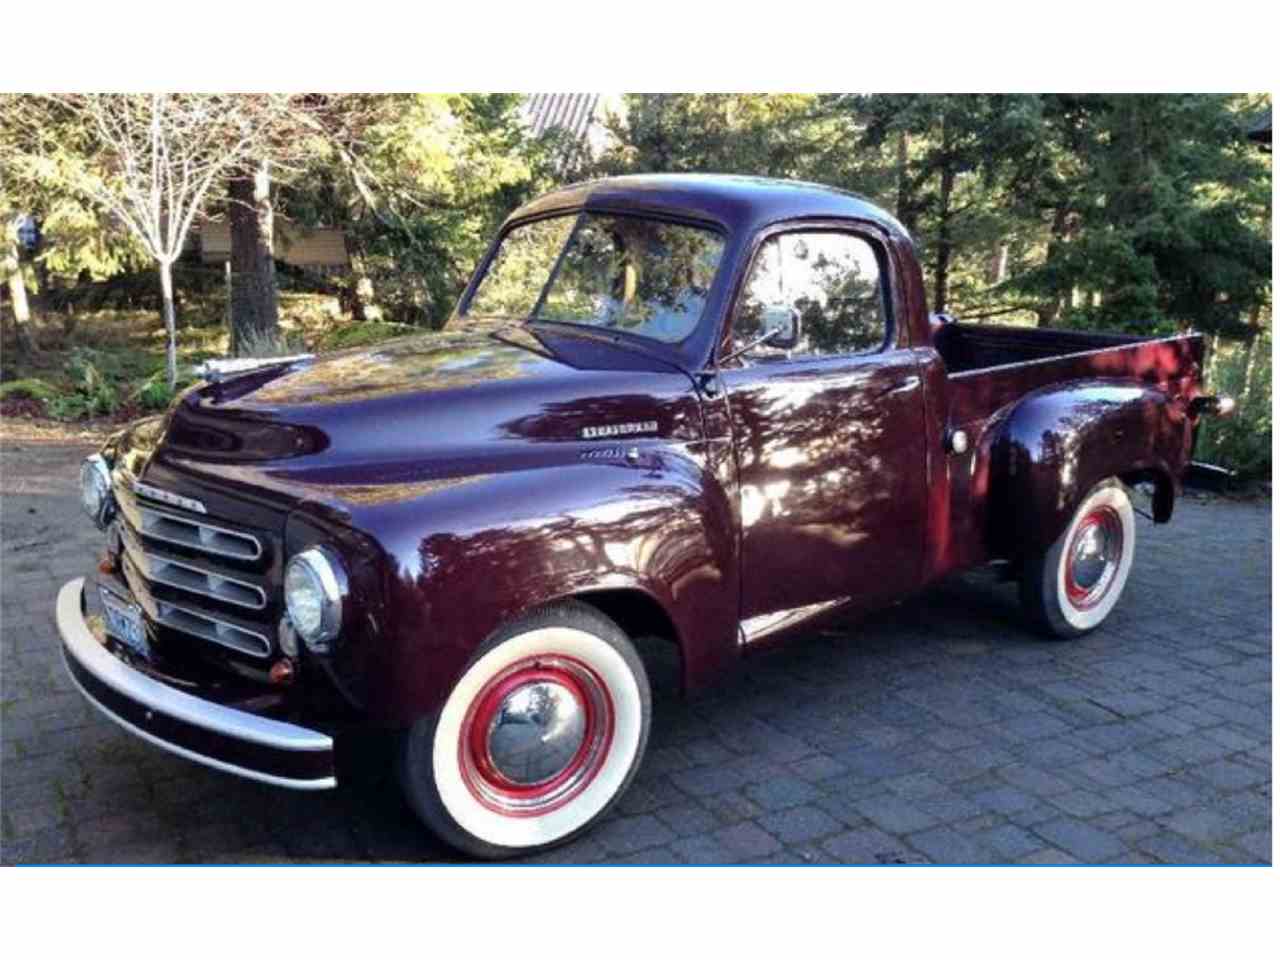 1950 Studebaker Truck for Sale | www.bagsaleusa.com/product-category/wallets/ | CC-1045194